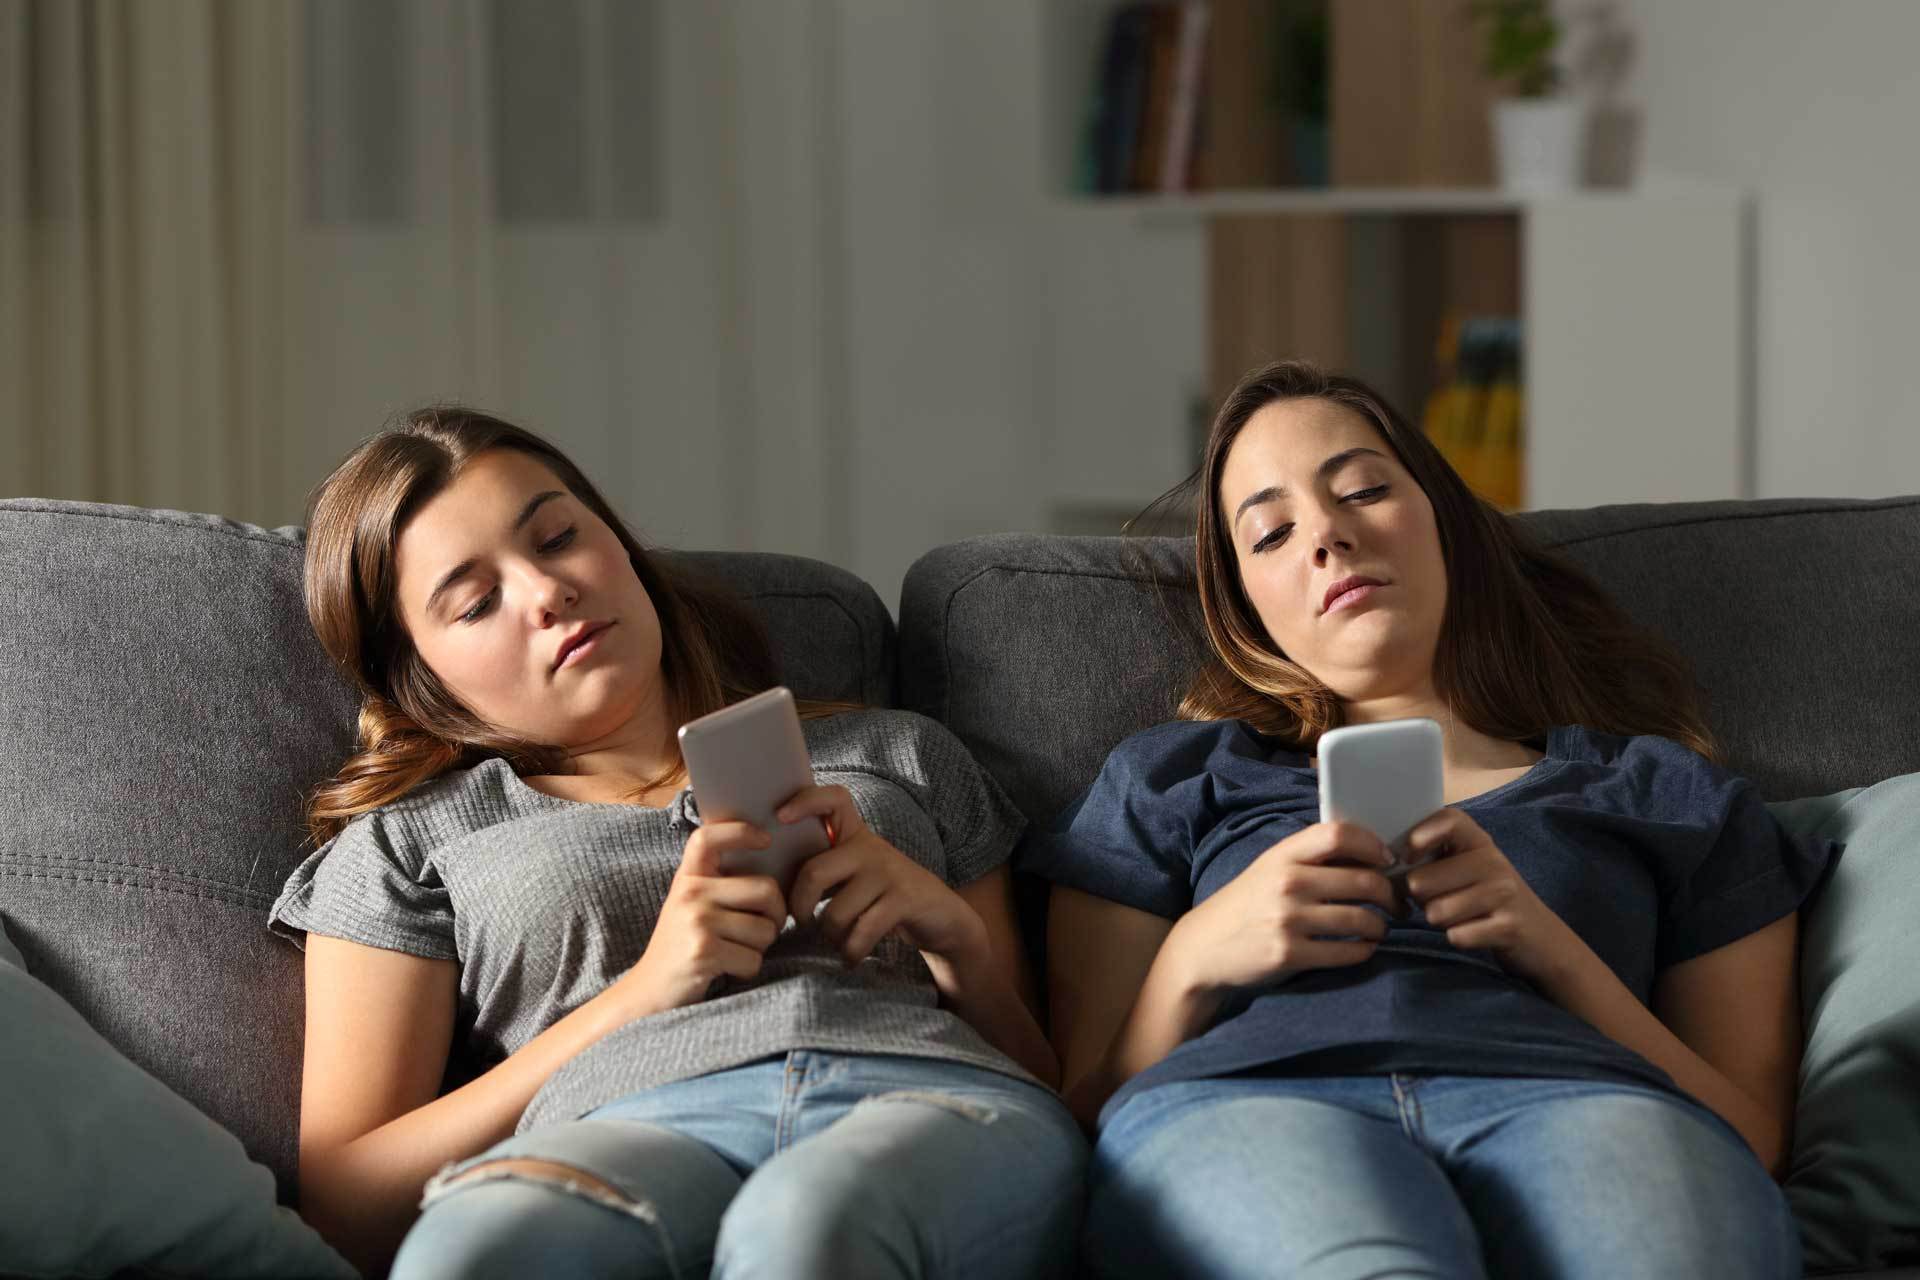 ‘Unlike’ Your Social Media Addiction: Why You Should Unplug and Make it Stick